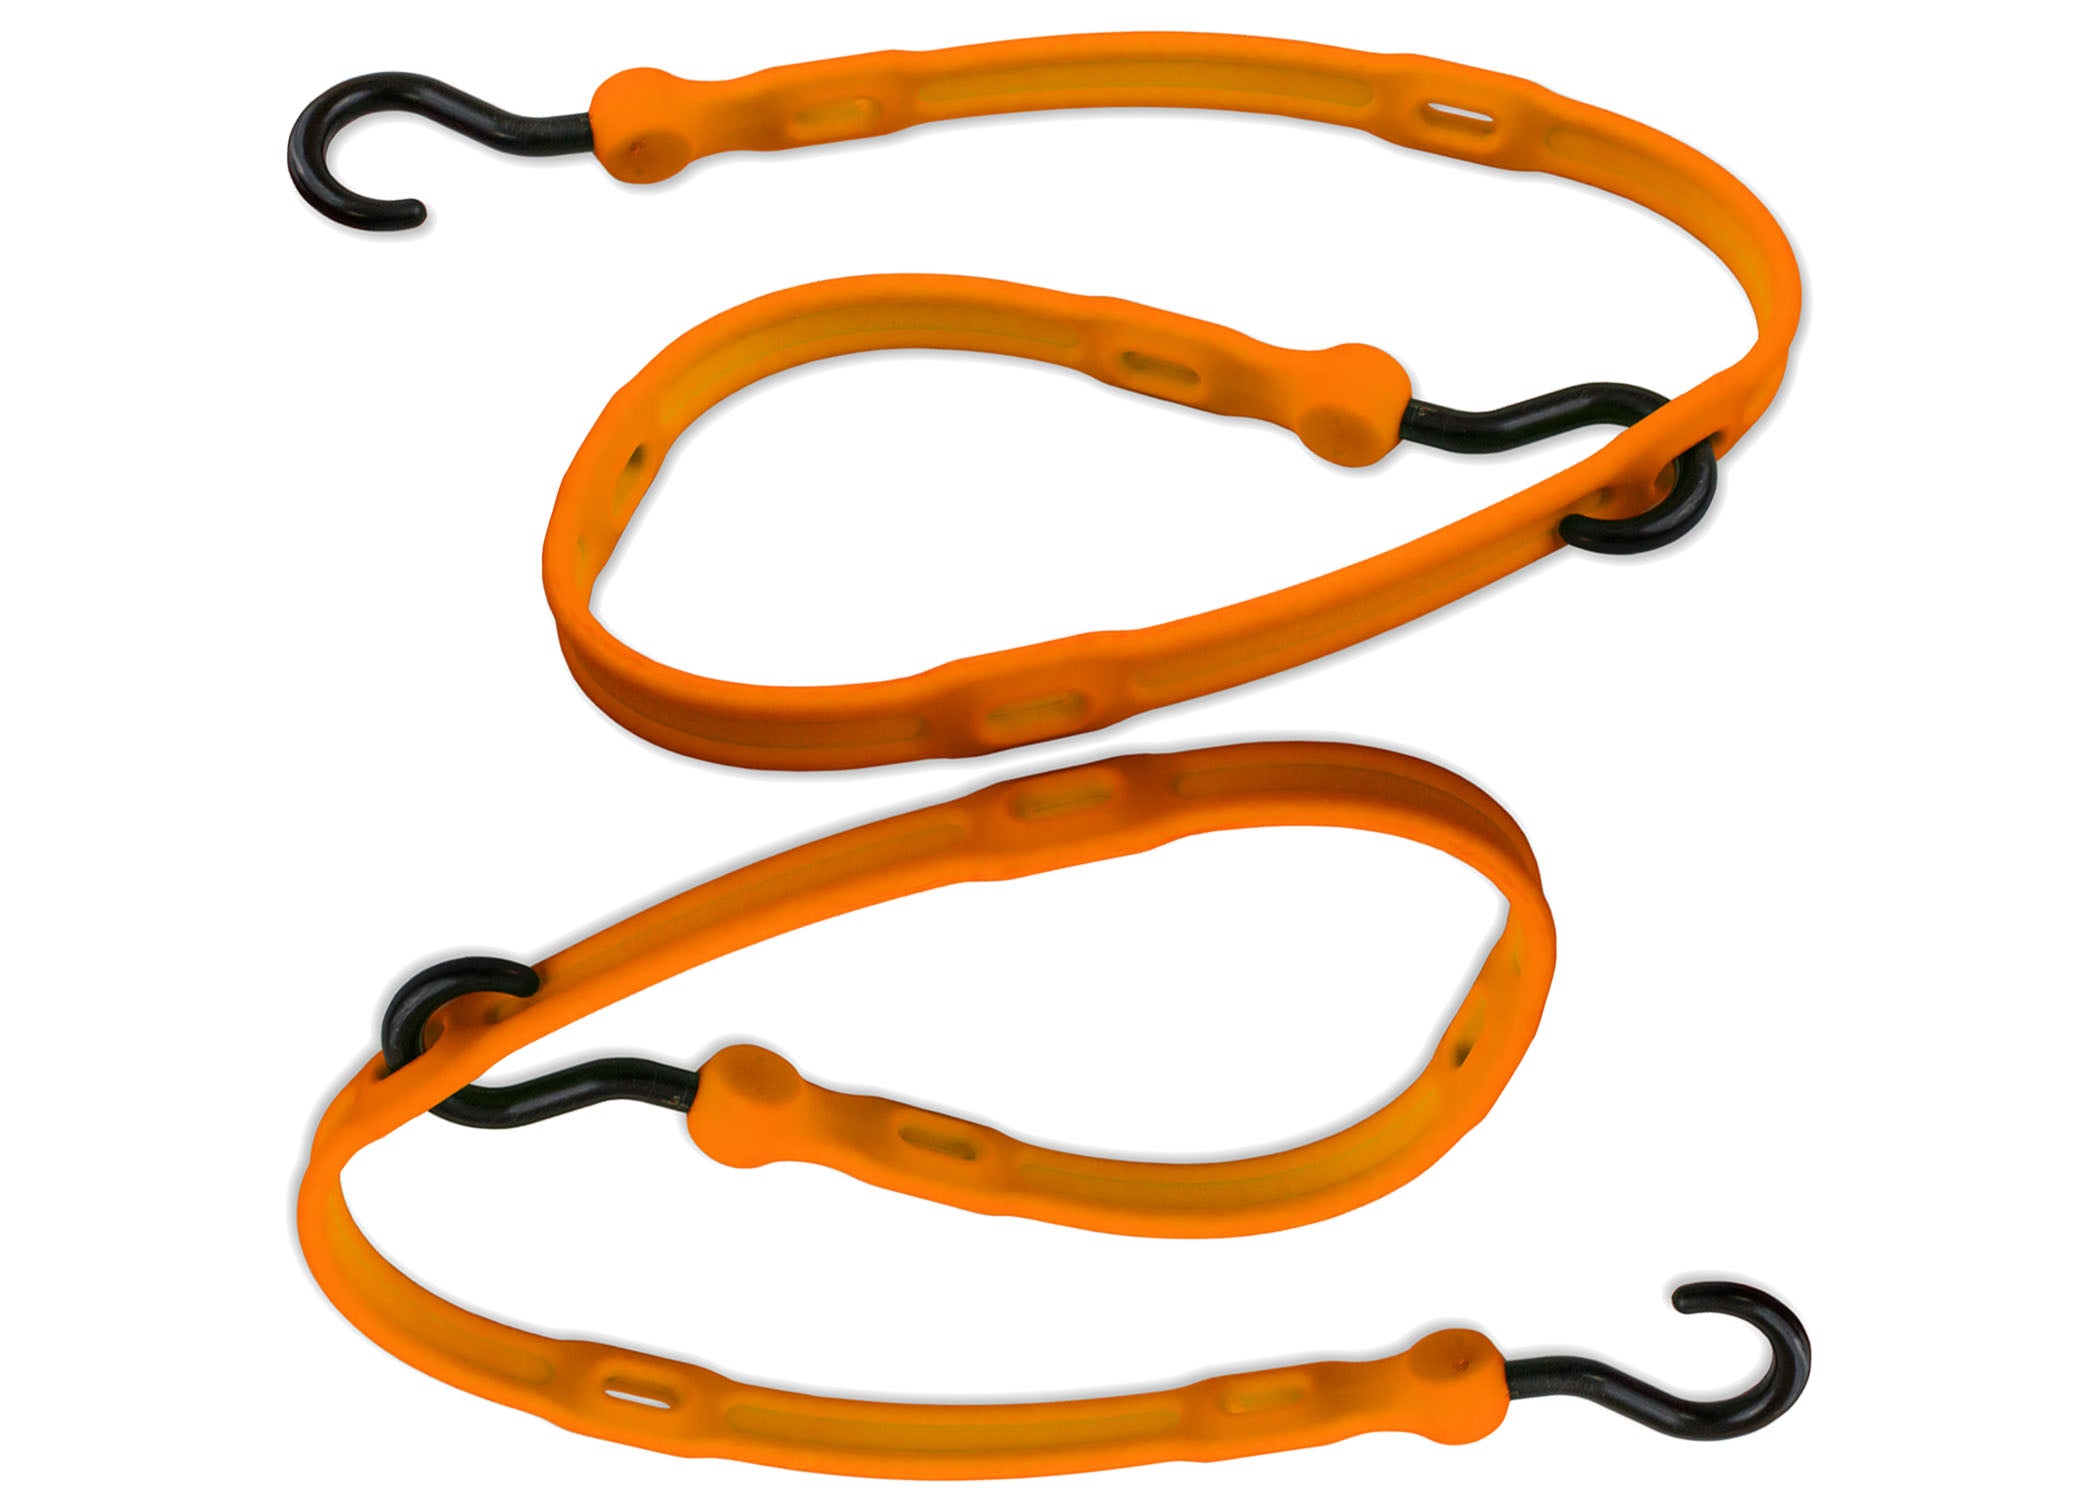 The Perfect Bungee 36" Adjust-A-Strap 4 Pack